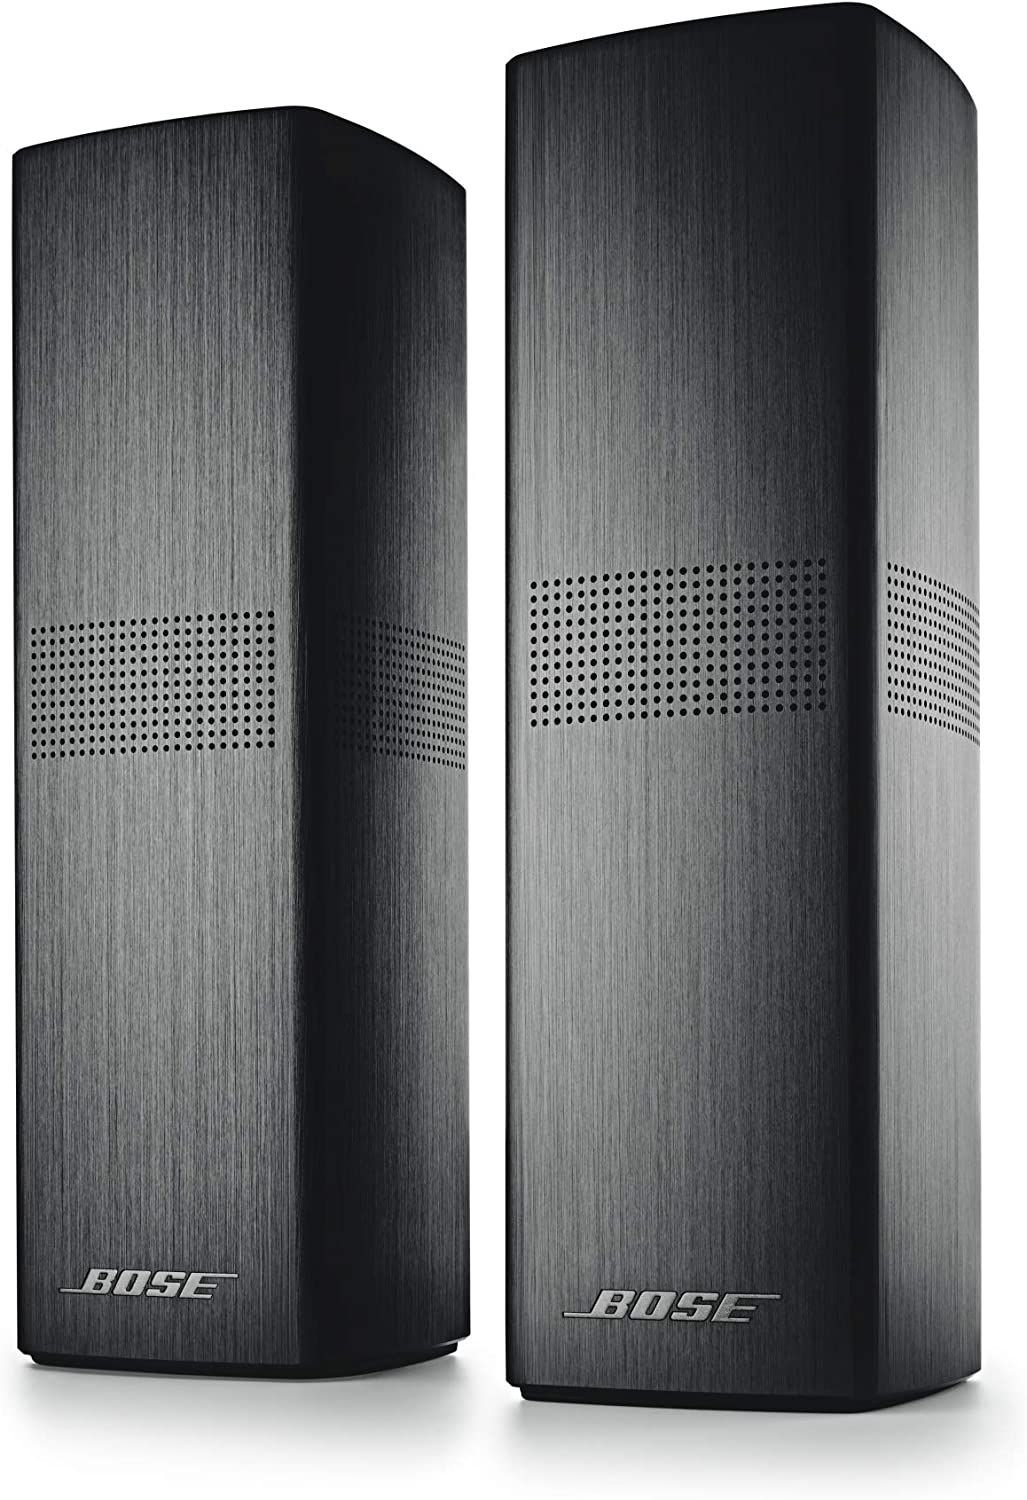 Bose Surround Speakers 700 product image of two tall, dark grey speakers.